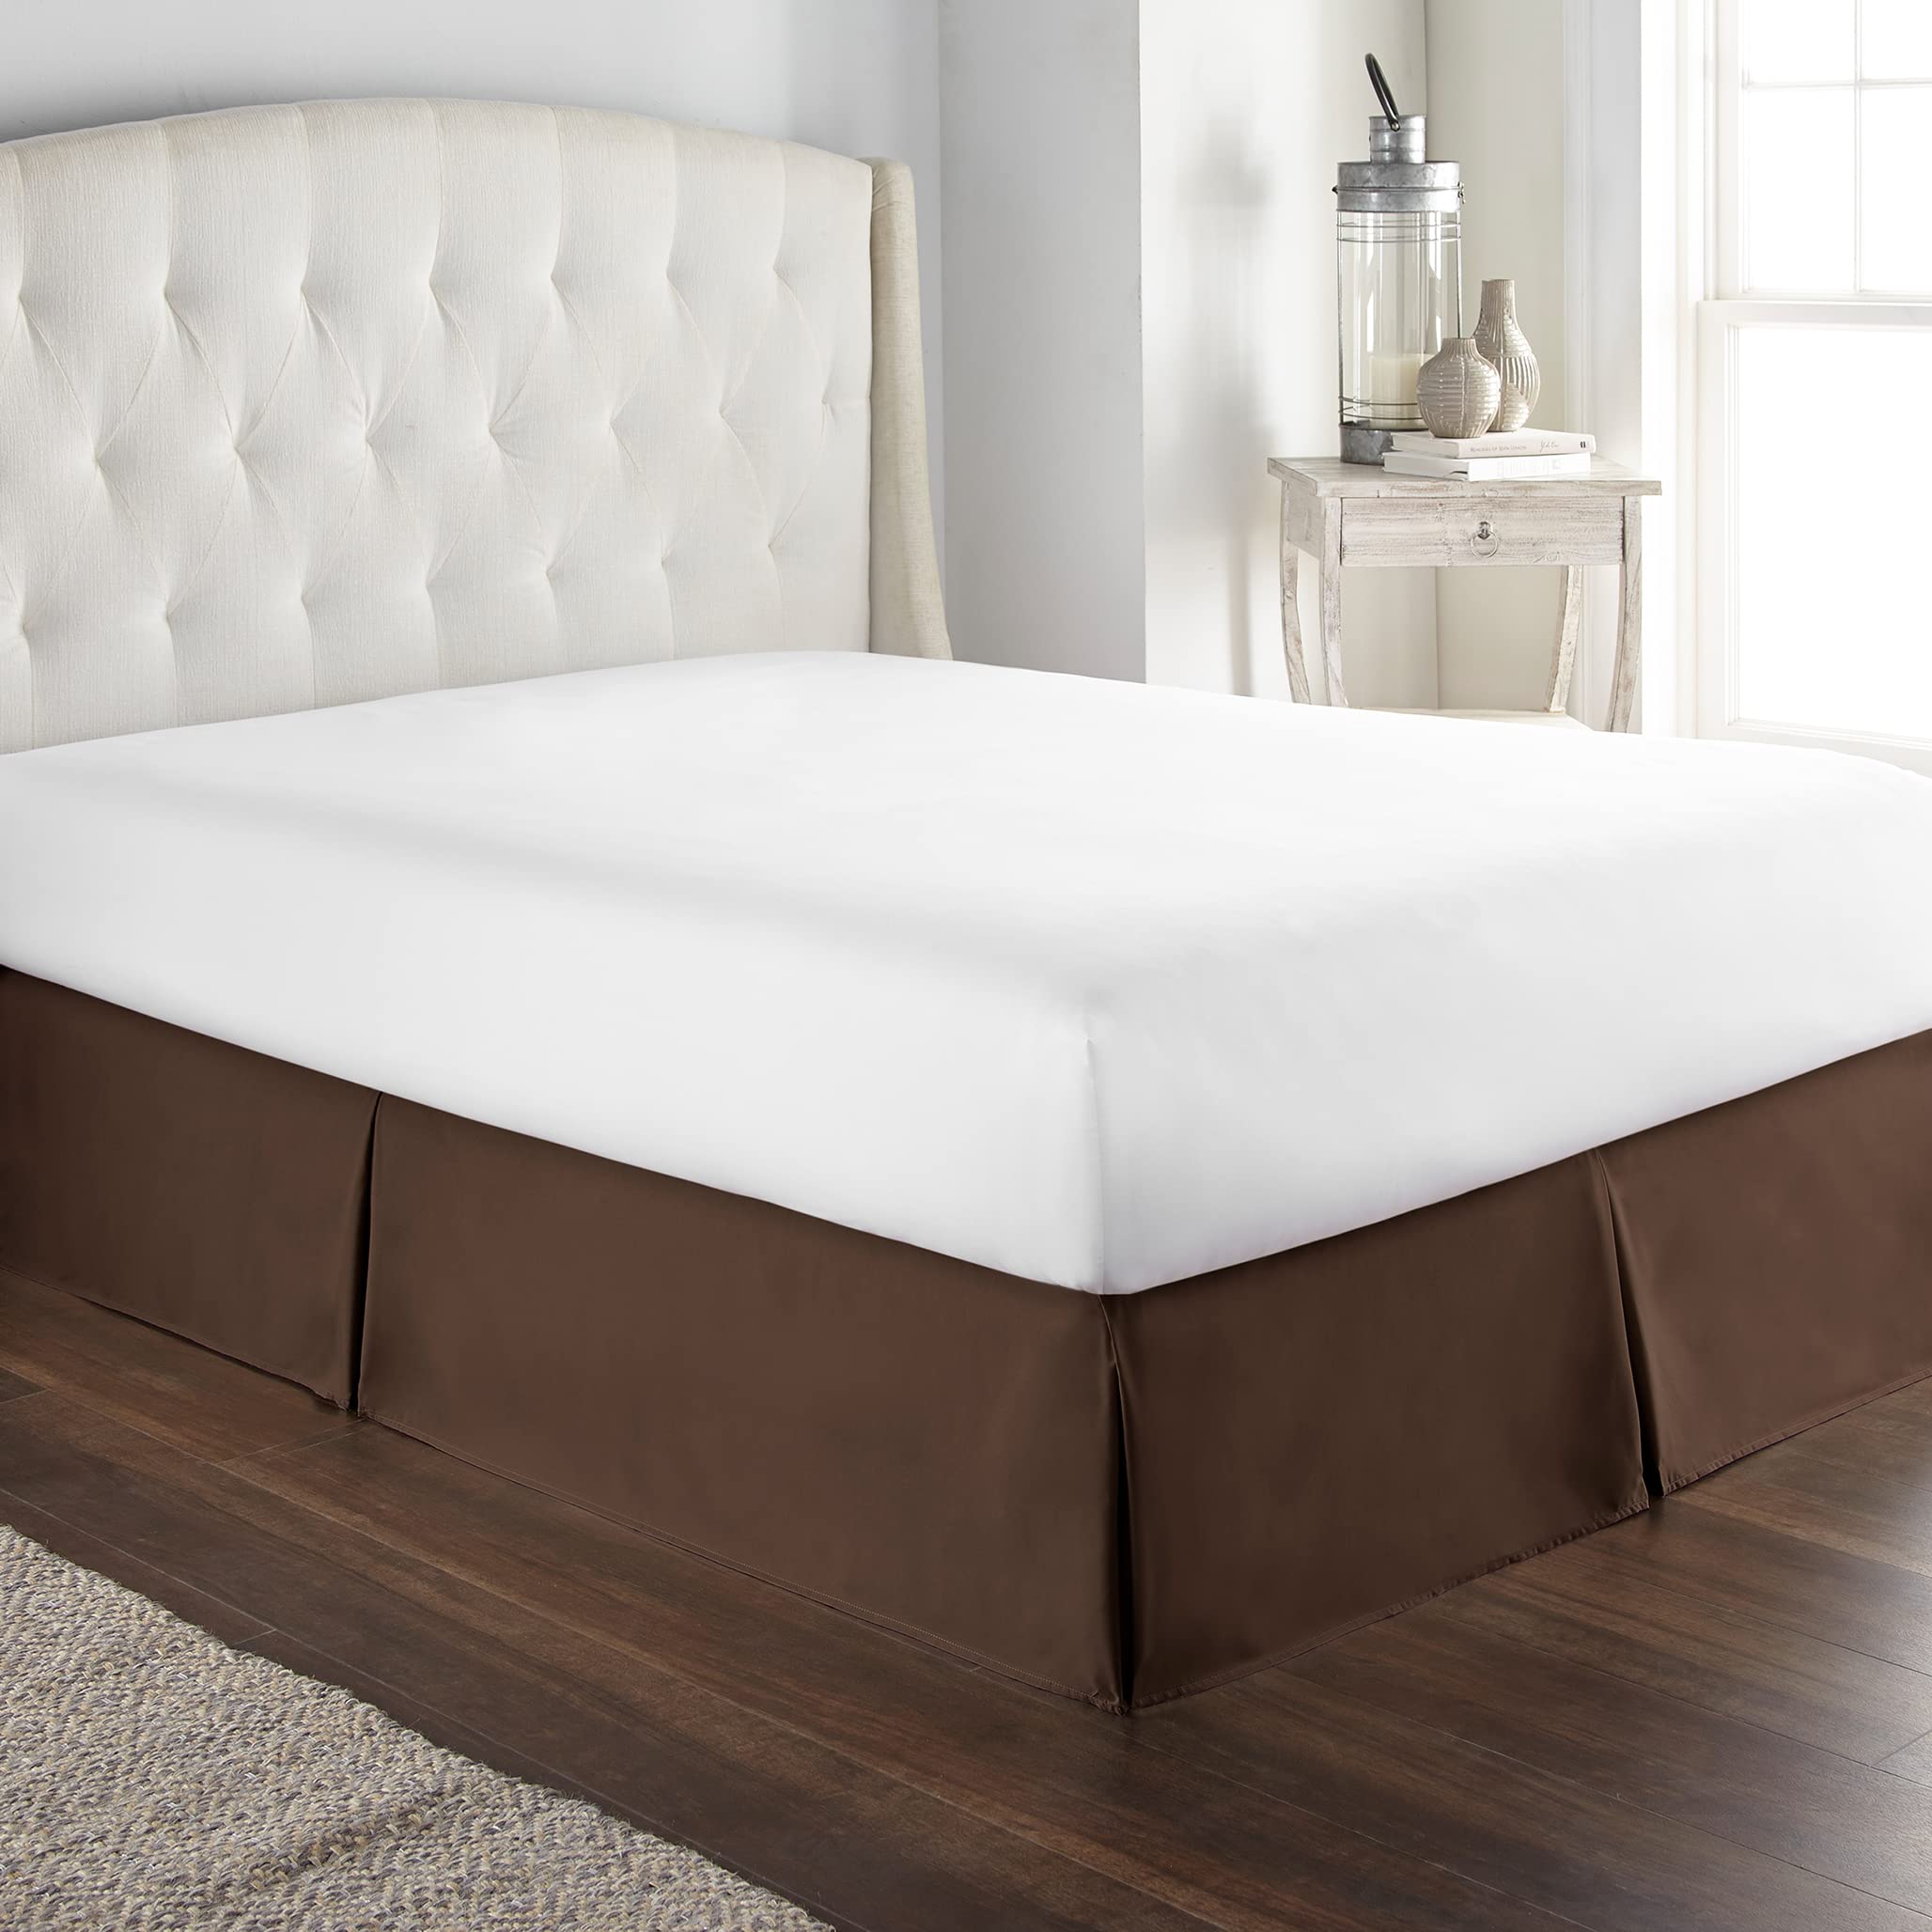 Book Cover HC Collection Brown King Bed Skirt - Dust Ruffle w/ 14 Inch Drop - Tailored, Wrinkle & Fade Resistant